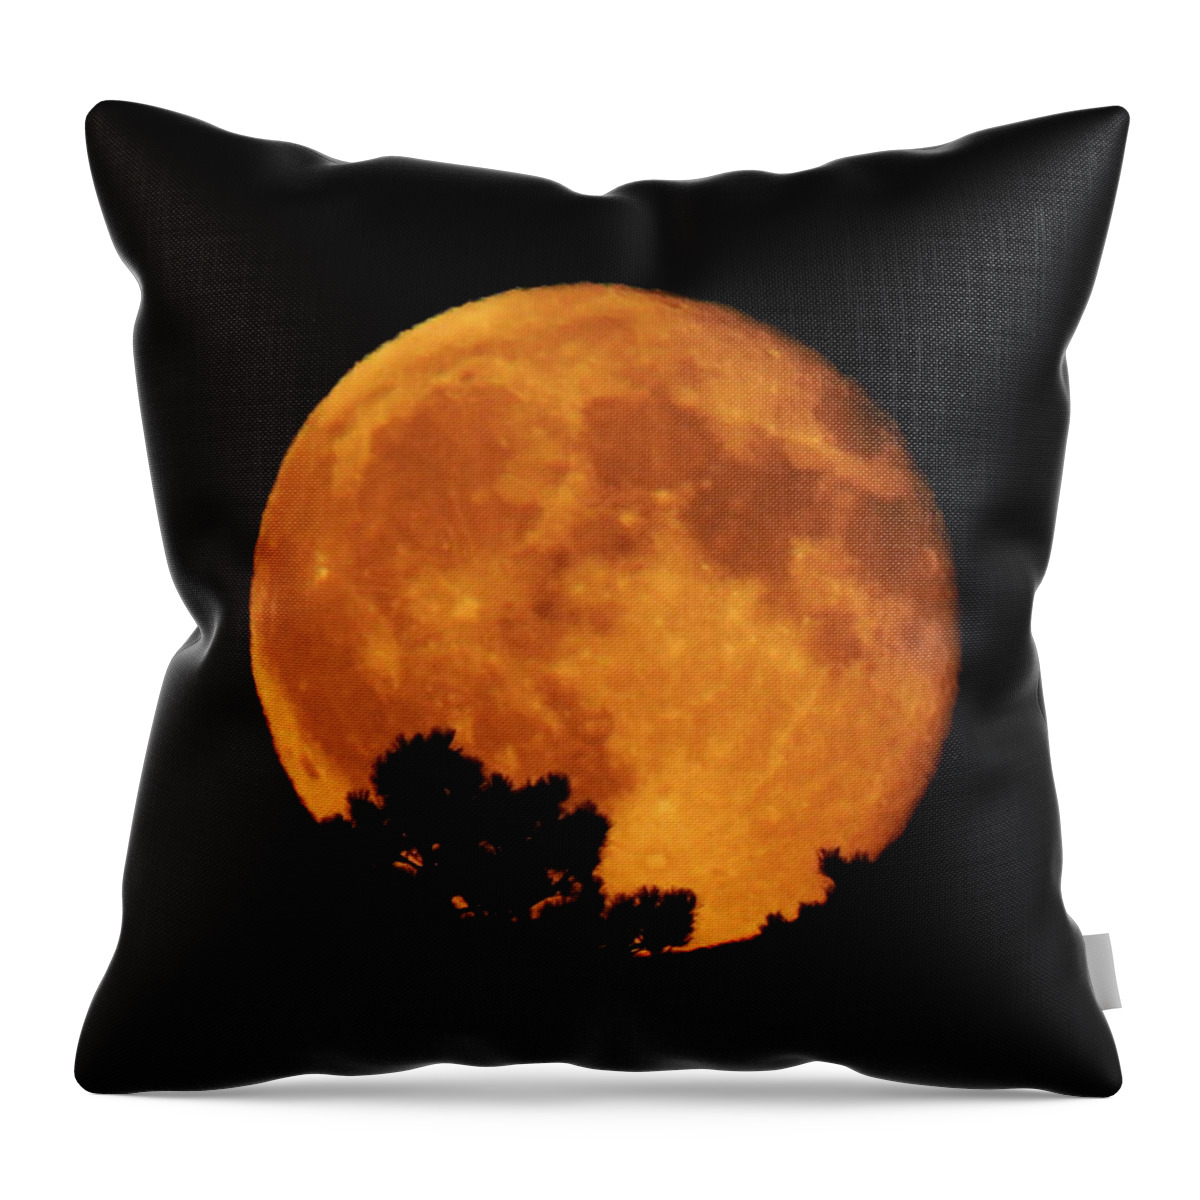 Moon Throw Pillow featuring the photograph Moonrise Over Pines by Dawn Key